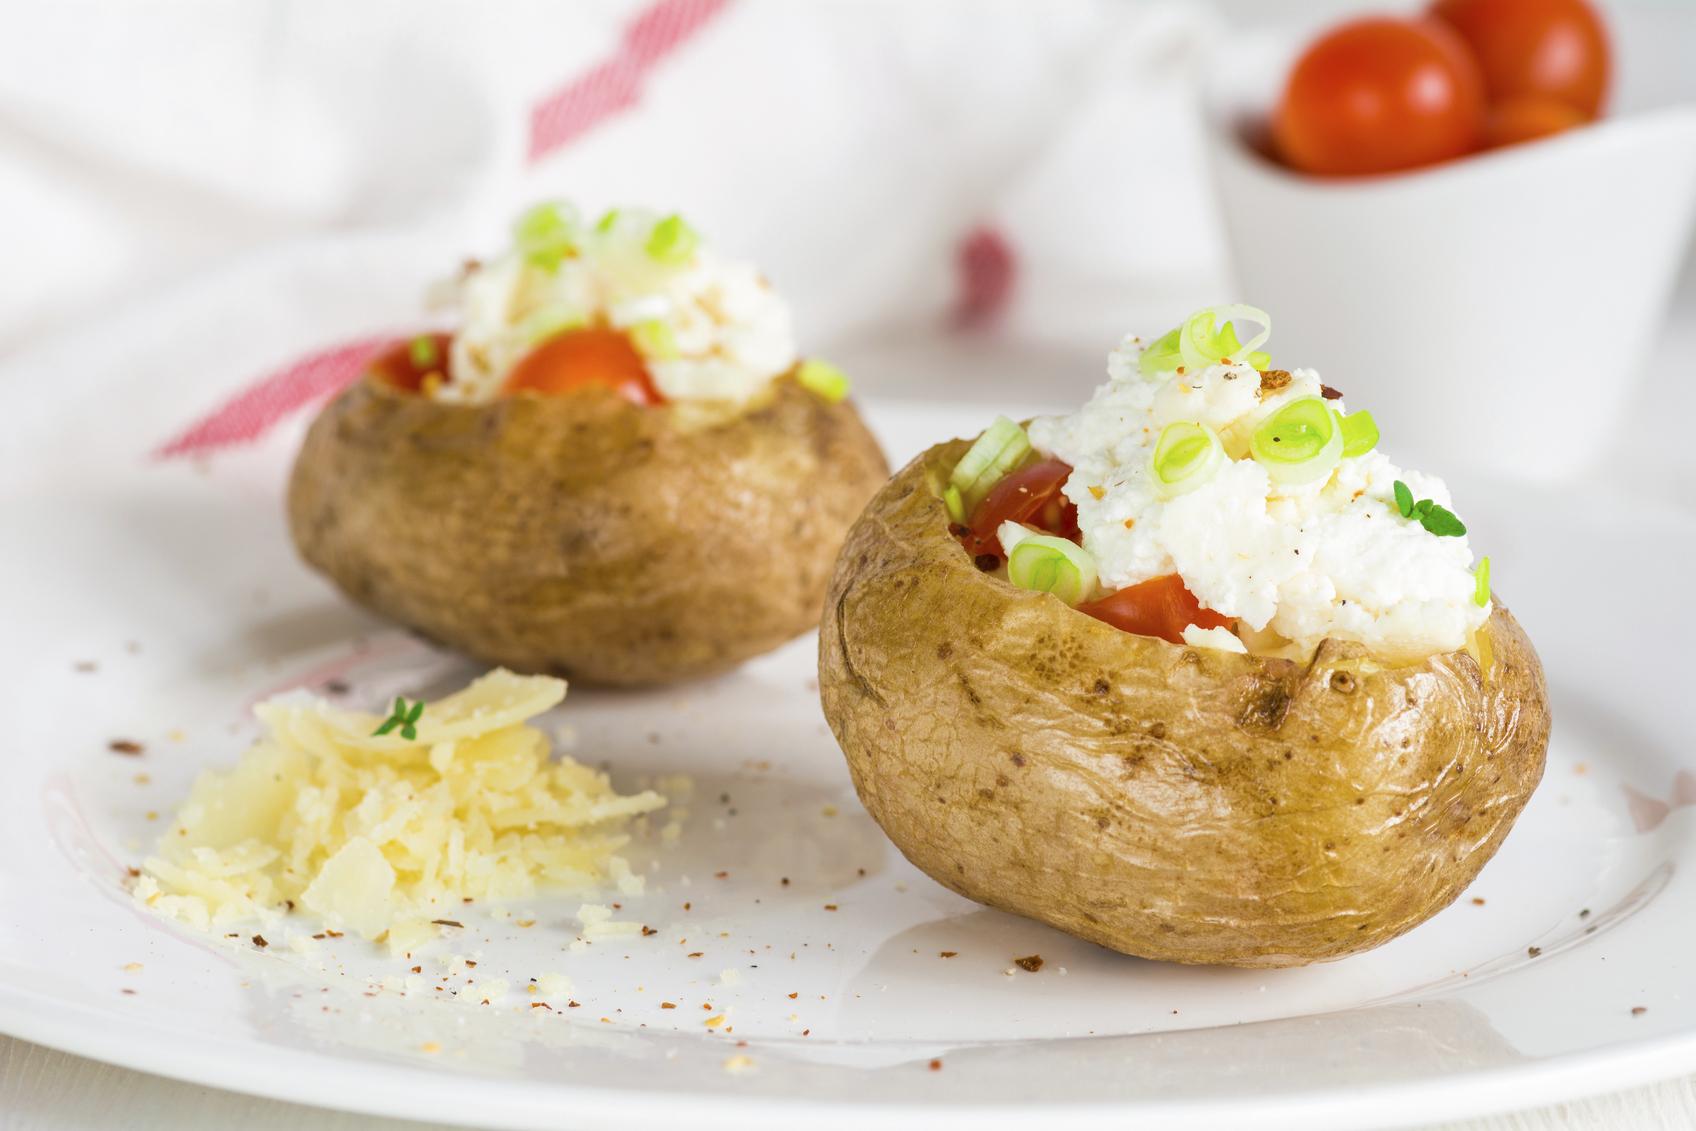 Baked potato with bacon, cheese and sour cream